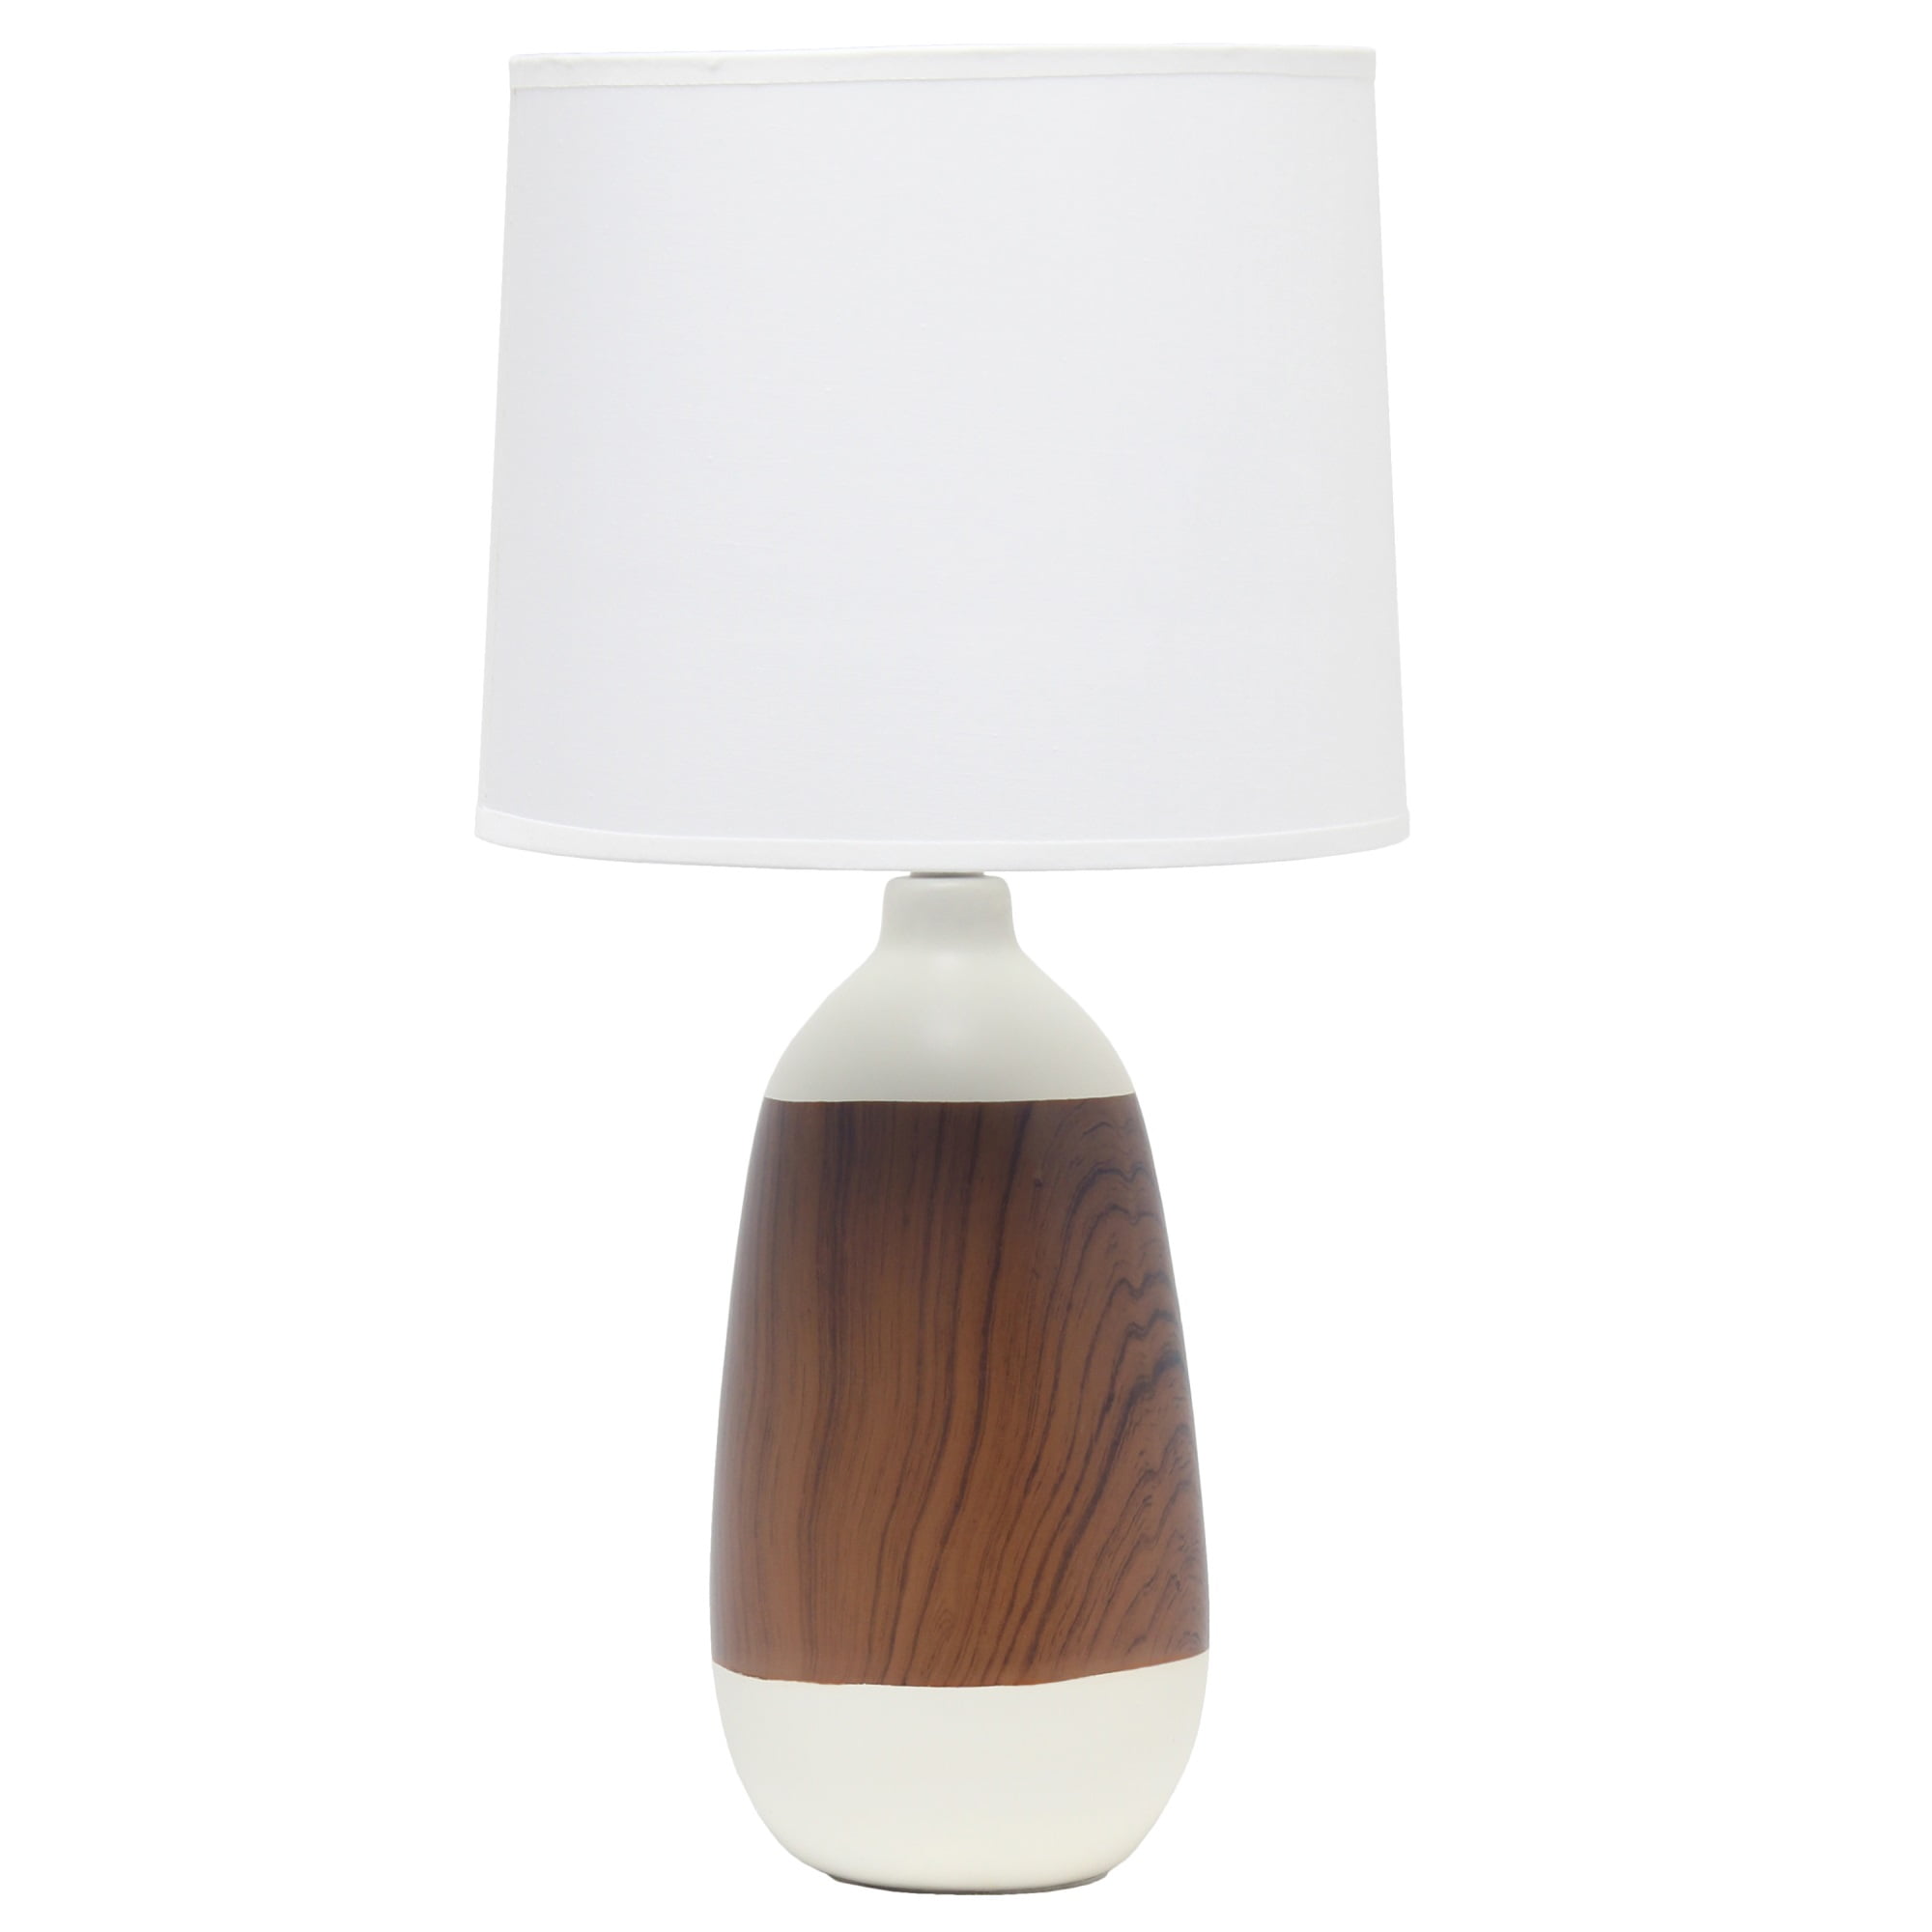 Simple Designs Ceramic Oblong Table Lamp, Dark Wood and White